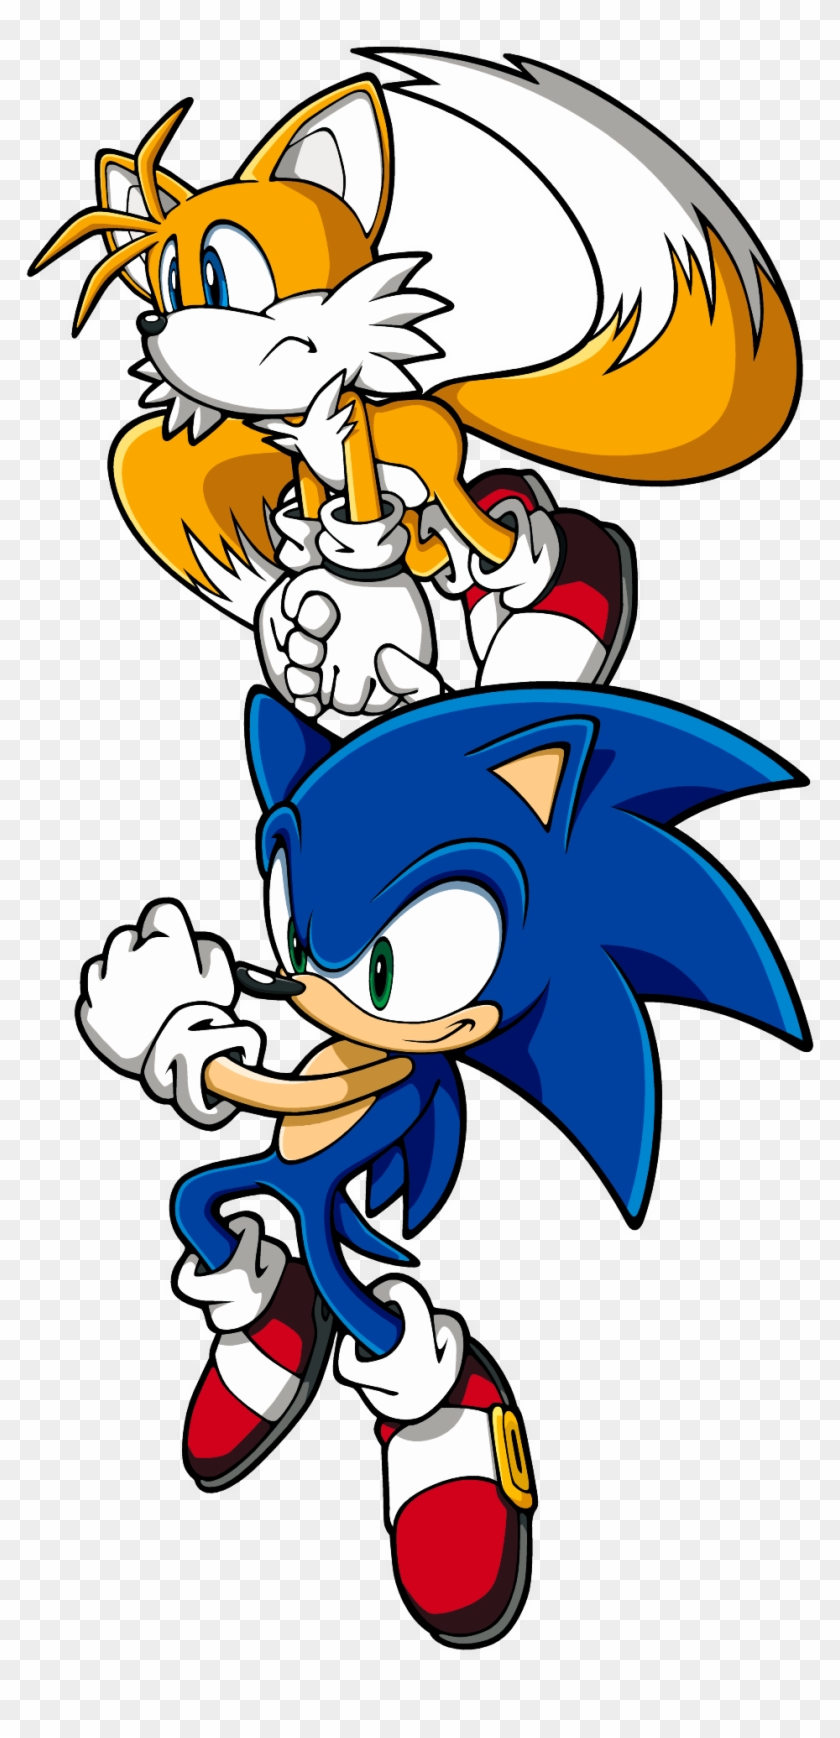 Sonic The Hedgehog And Miles Tails Prower - Sonic The Hedgehog And Miles Tails Prower #682261